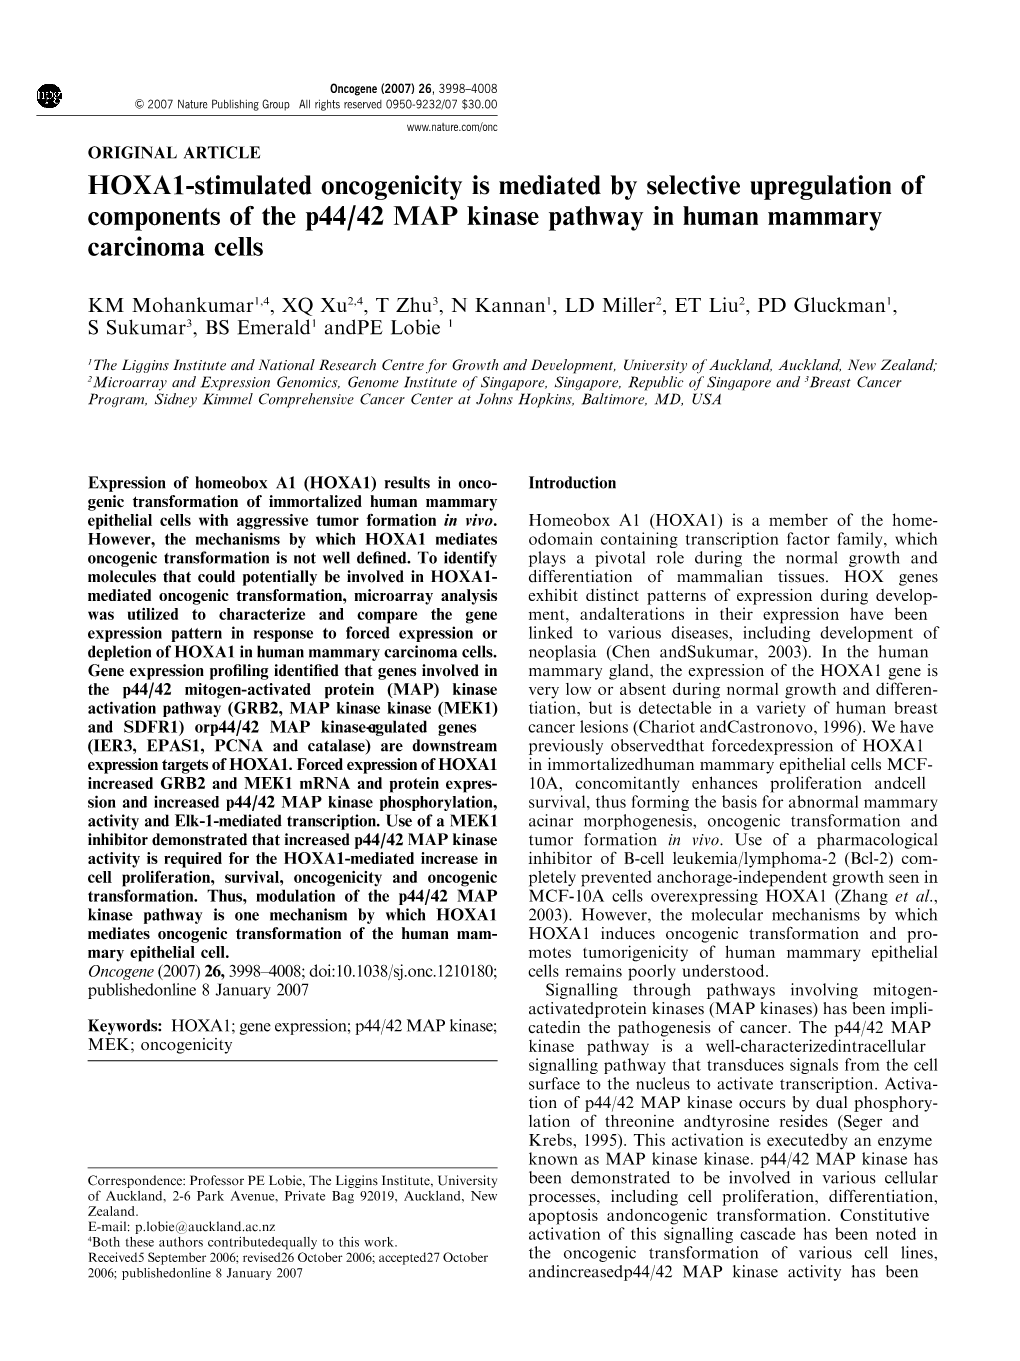 HOXA1-Stimulated Oncogenicity Is Mediated by Selective Upregulation of Components of the P44/42 MAP Kinase Pathway in Human Mammary Carcinoma Cells